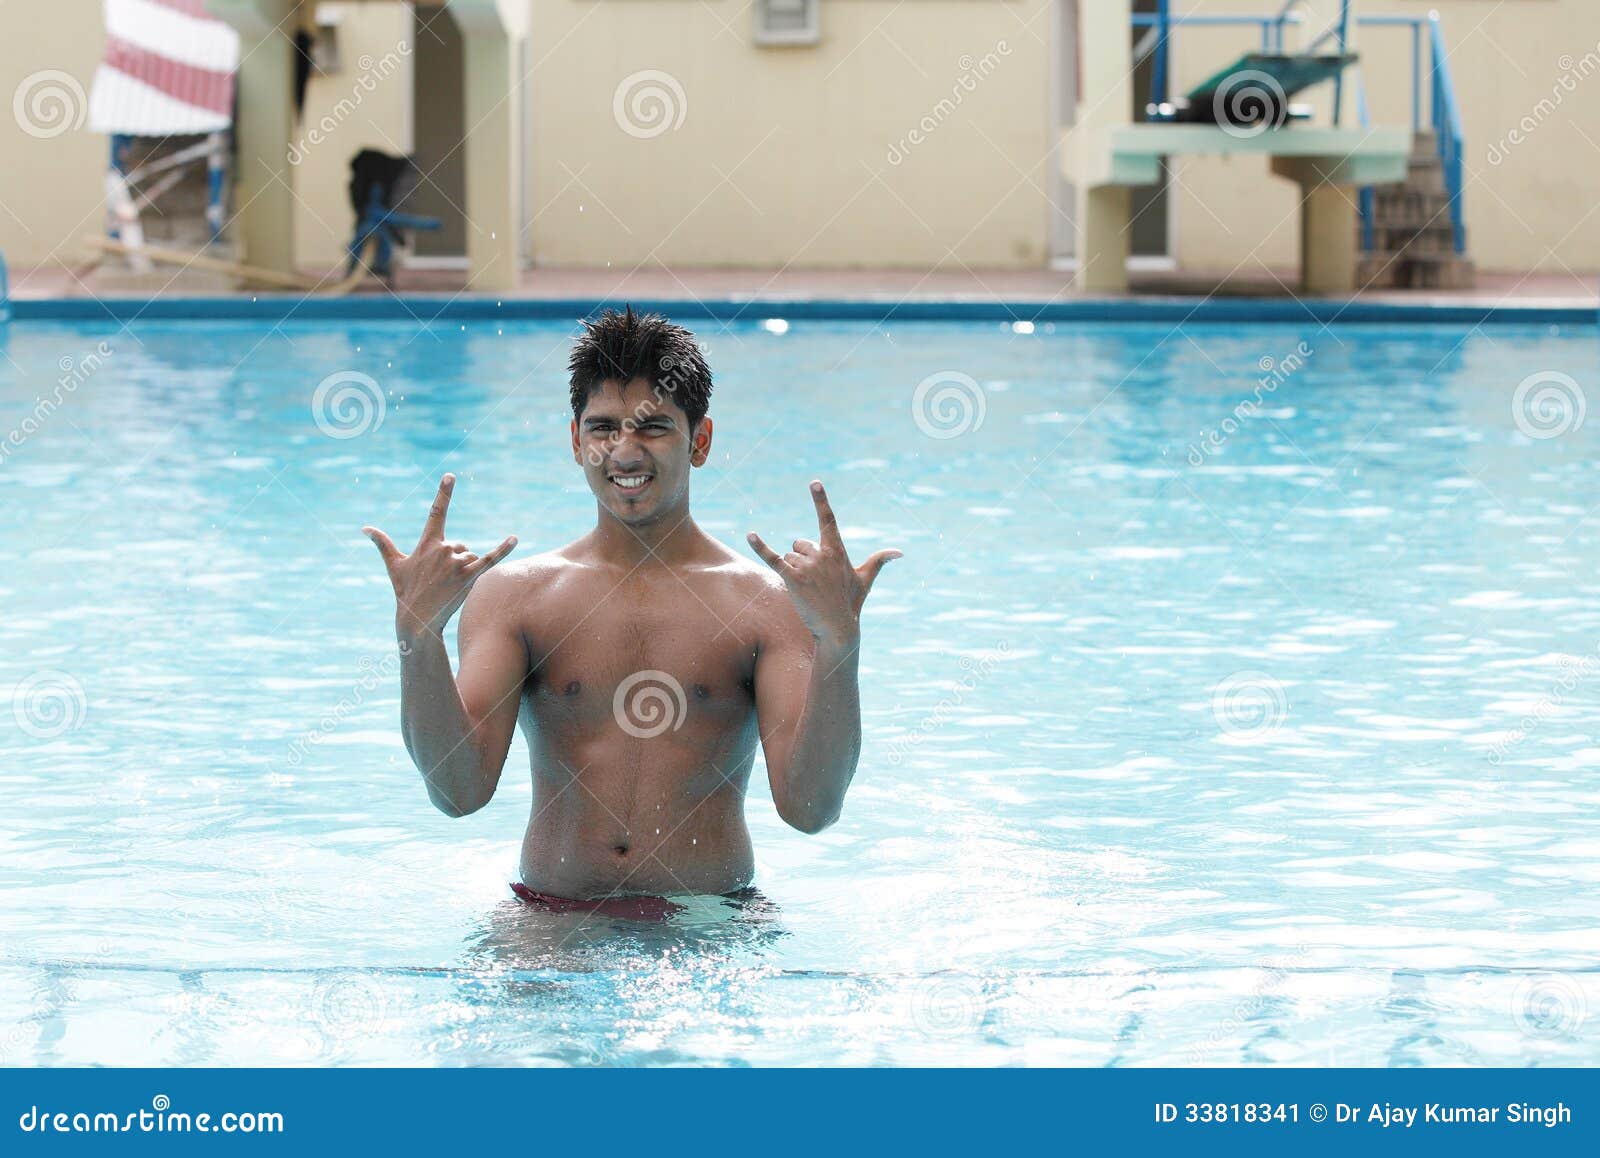 Swimming Pool Photography Poses Photography Galleries